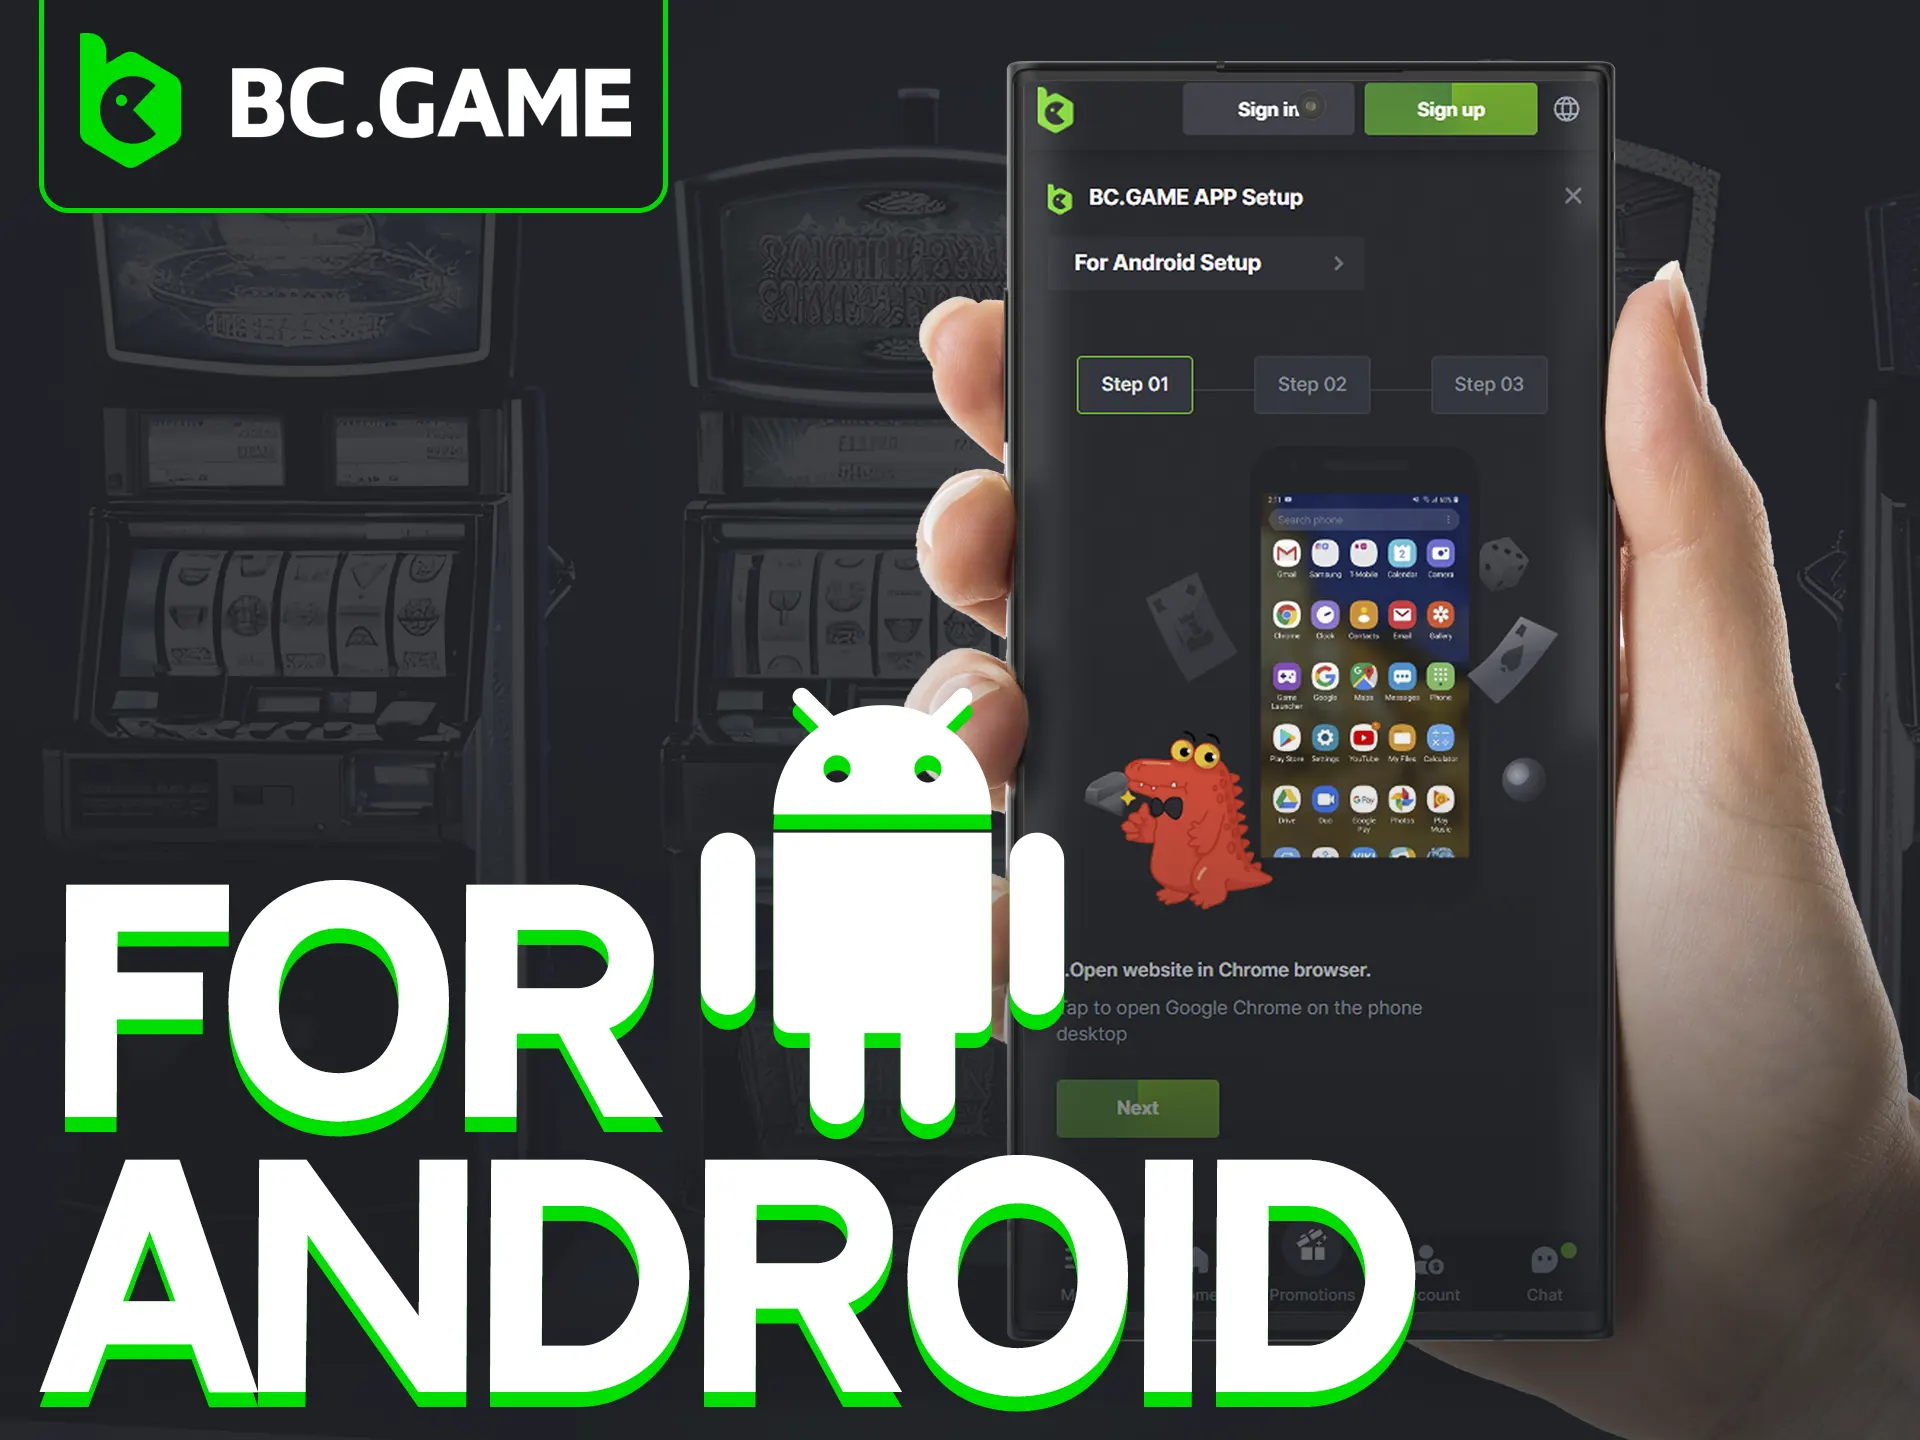 Download BC Game app on Android from official website.